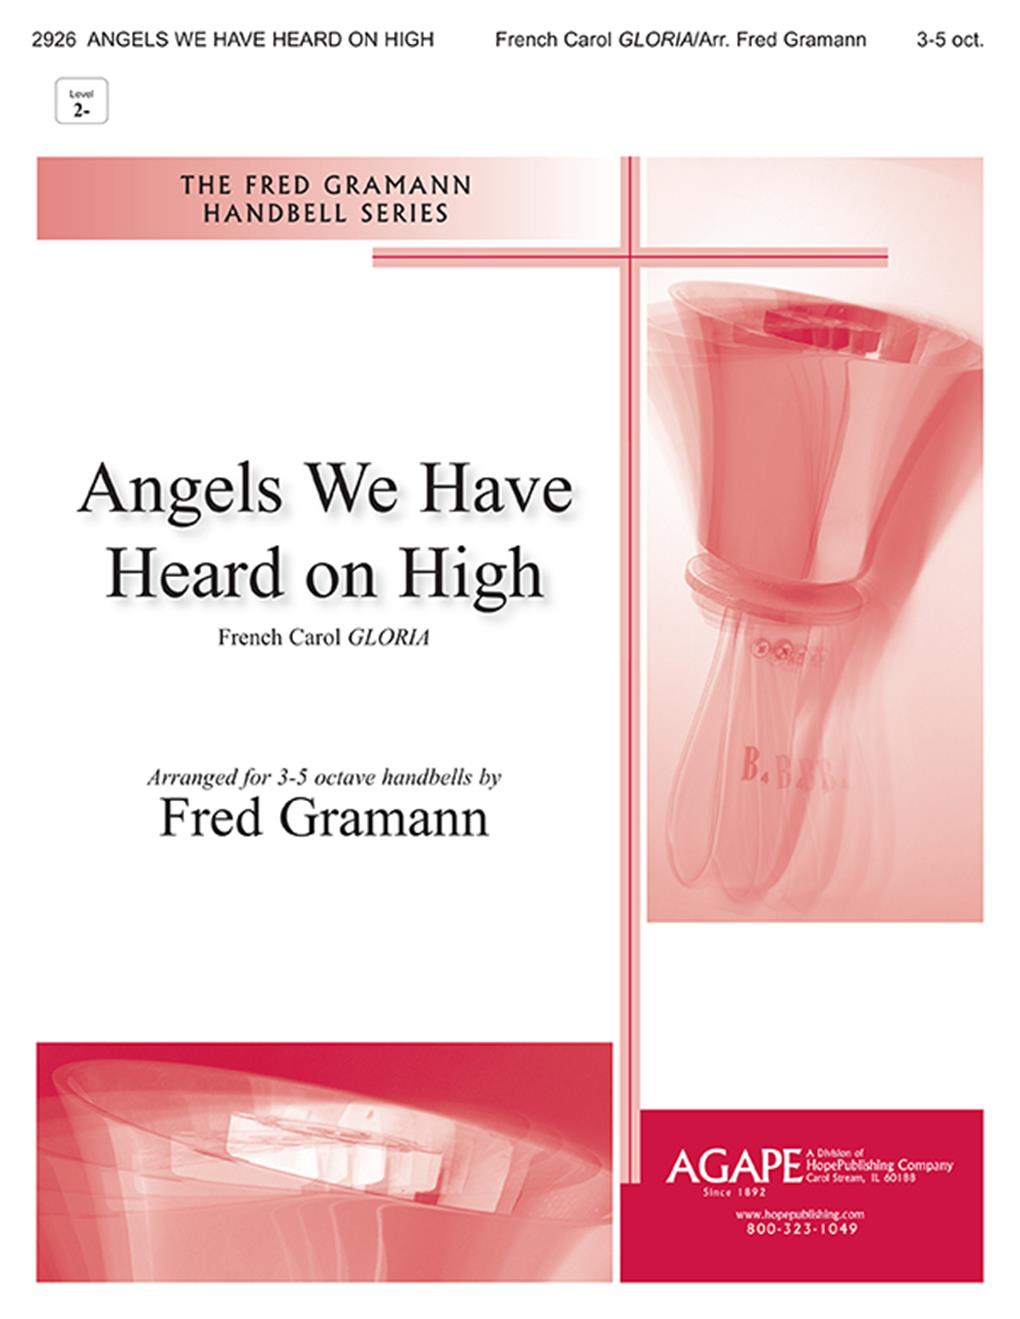 Angels We Have Heard On High - 3-5 Oct. Cover Image